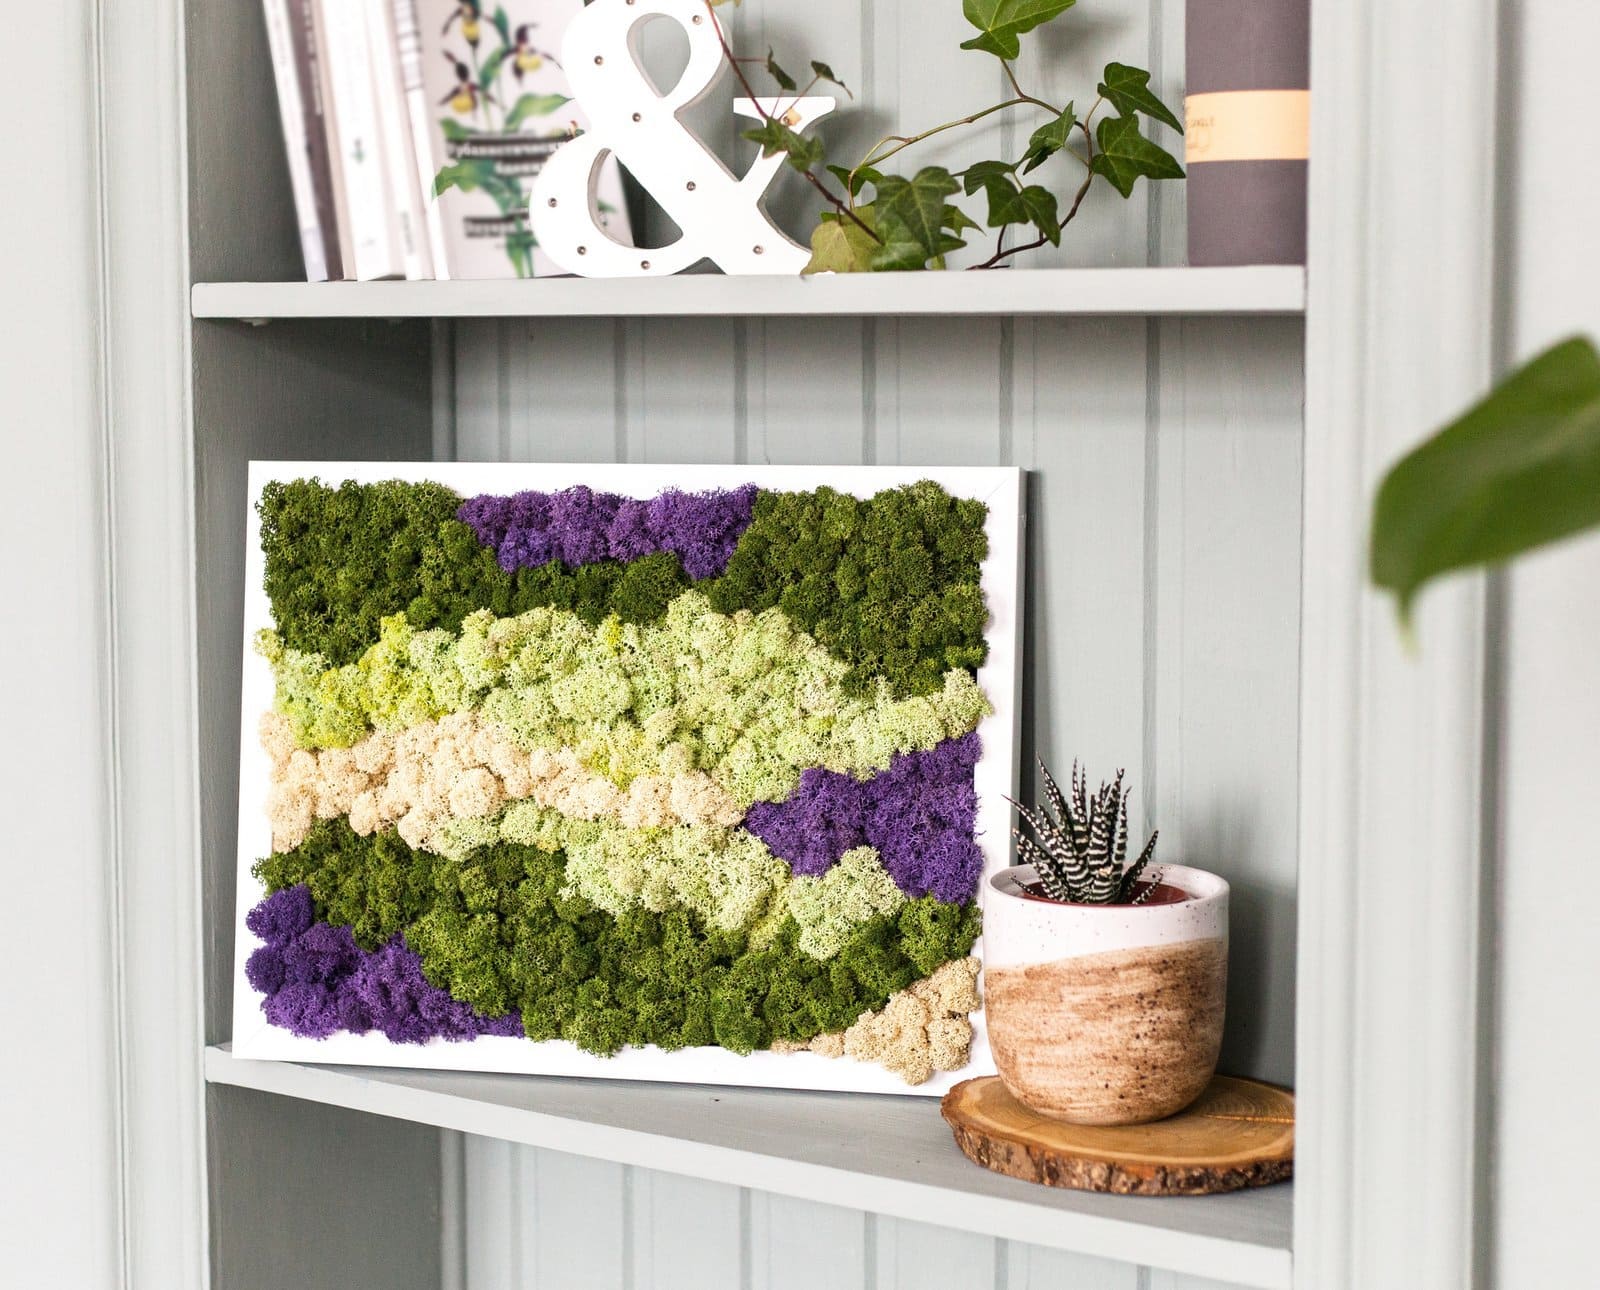 Indoor plants decorating: Multicolored moss and plant landscape frame on a shelf